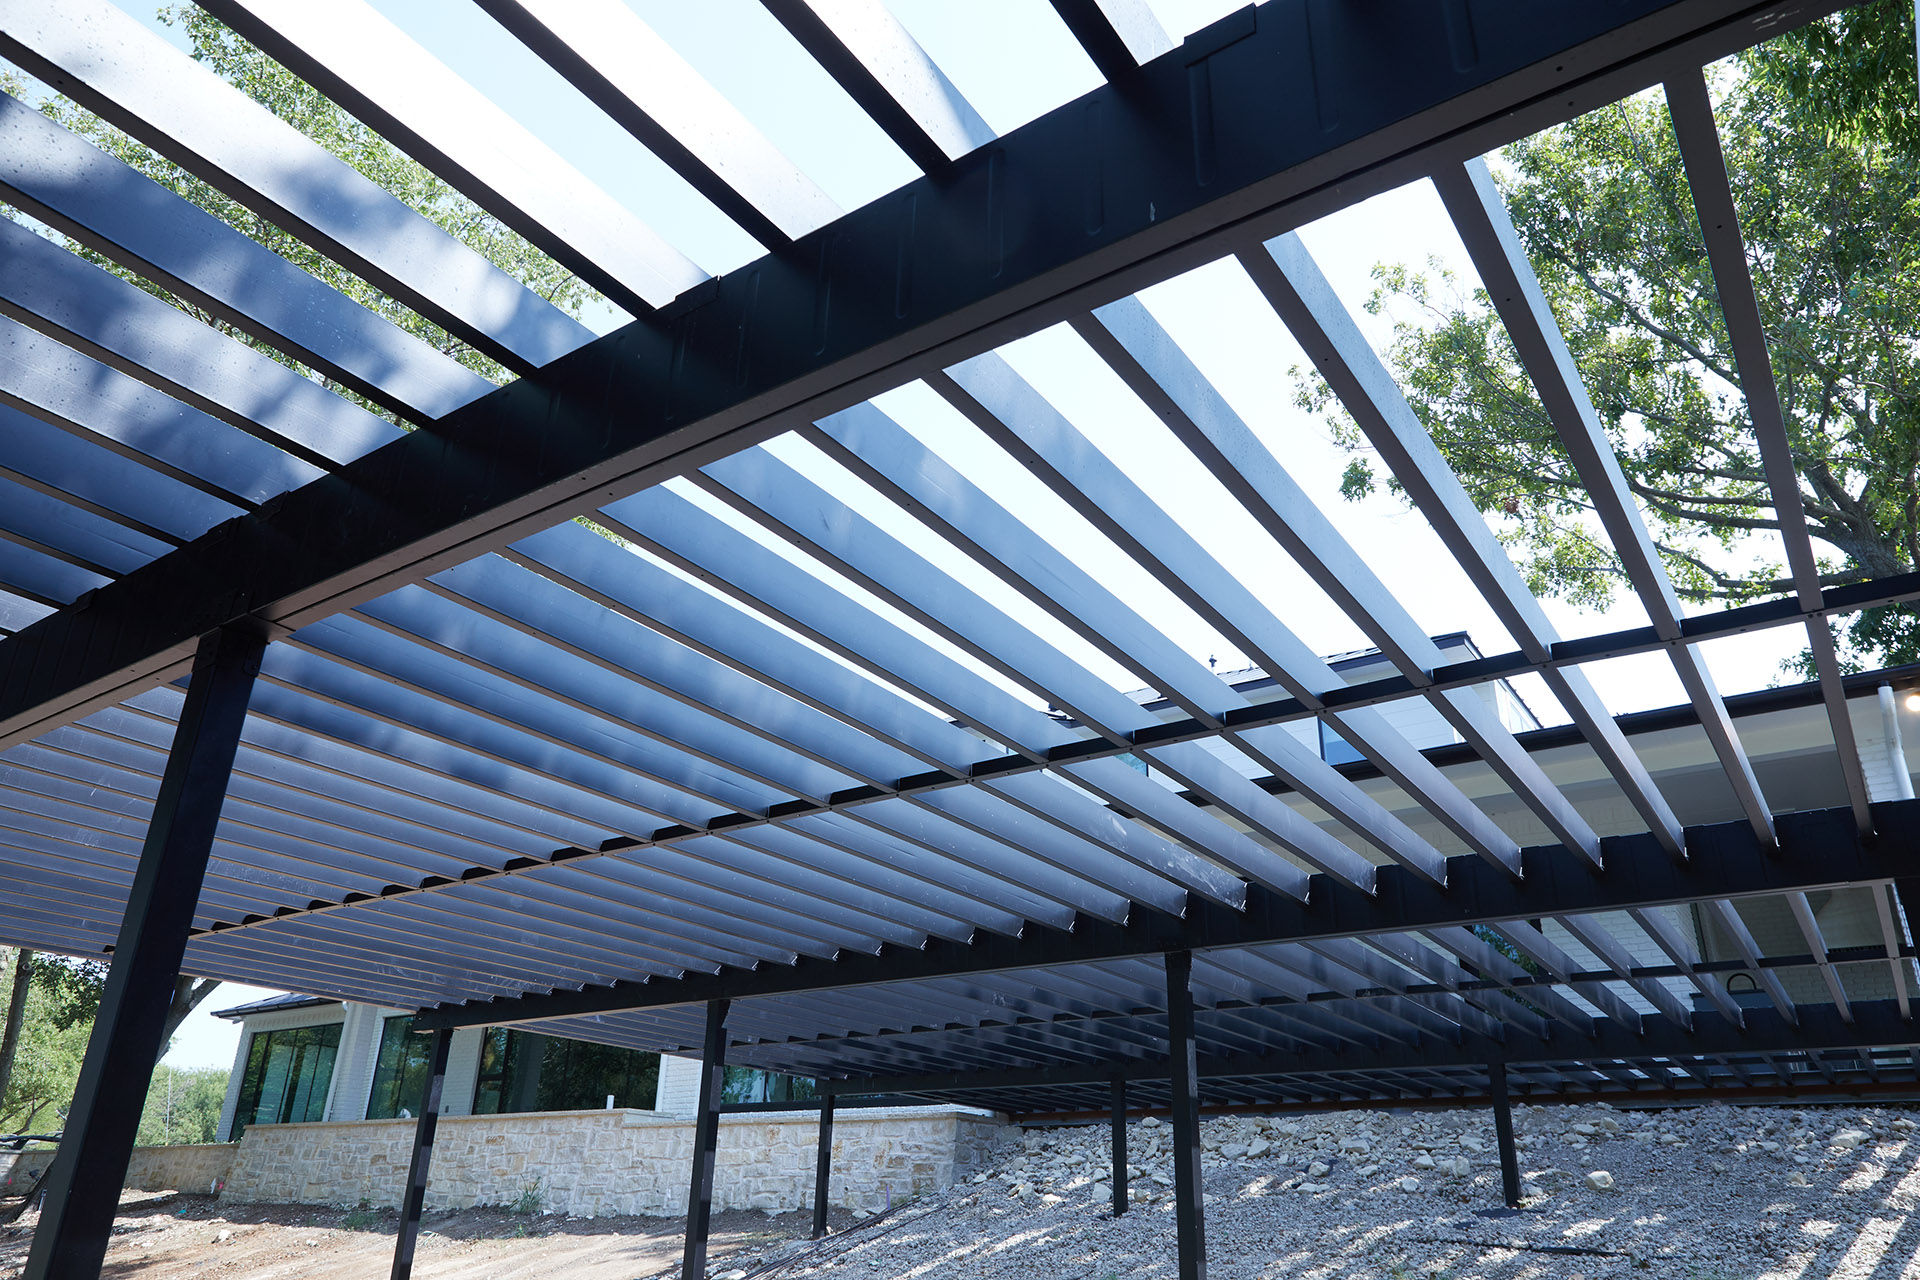 Underneath view of steel deck framing, showing strong straight lines.